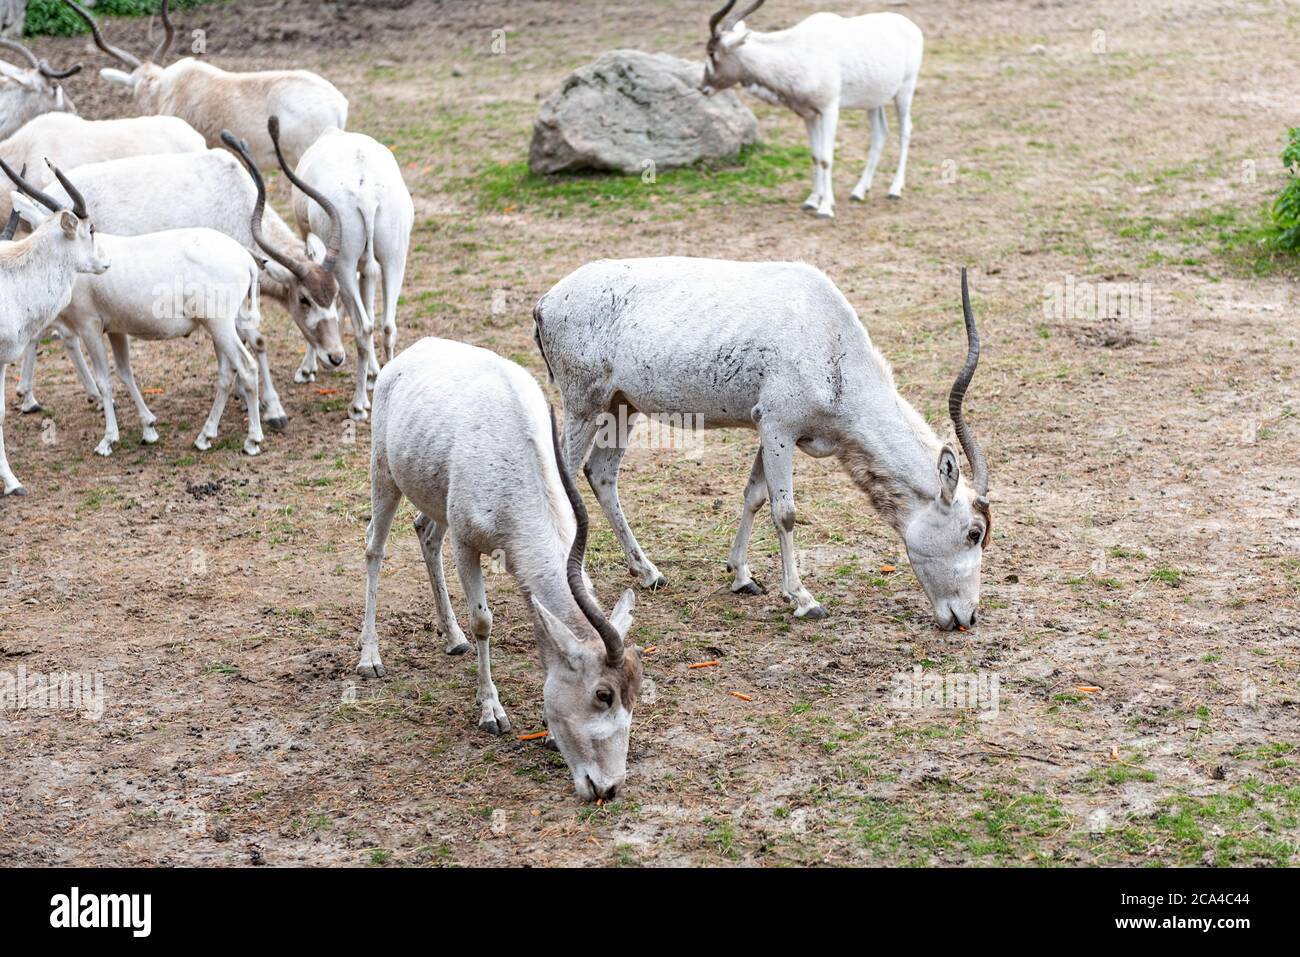 The addax (Addax nasomaculatus) is an antelope of the genus Addax, that lives in the Sahara desert. Stock Photo